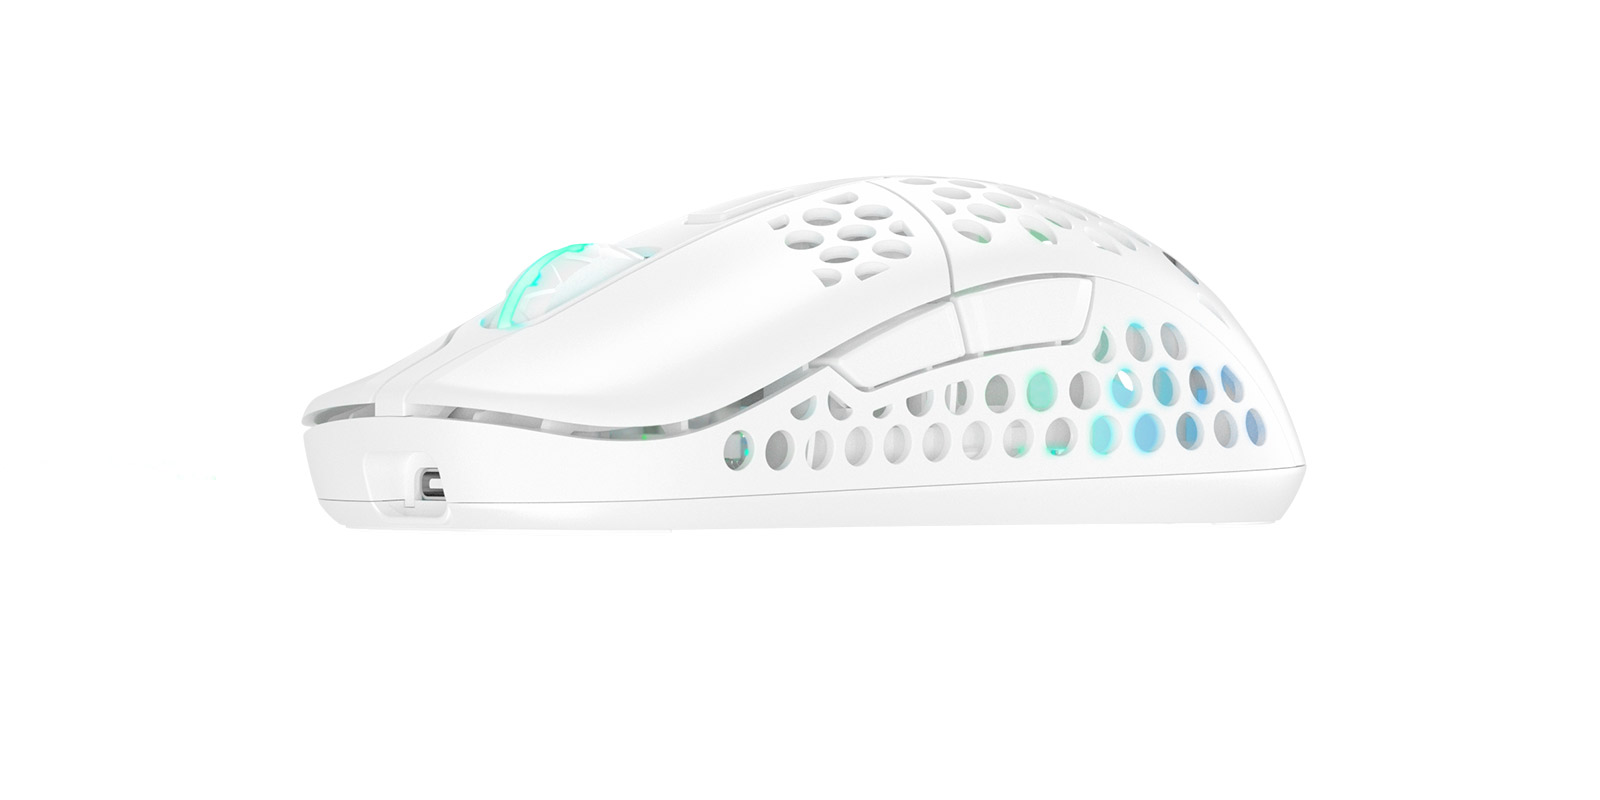 M42-Wireless-White-Gaming-Mouse_gallery01.jpg